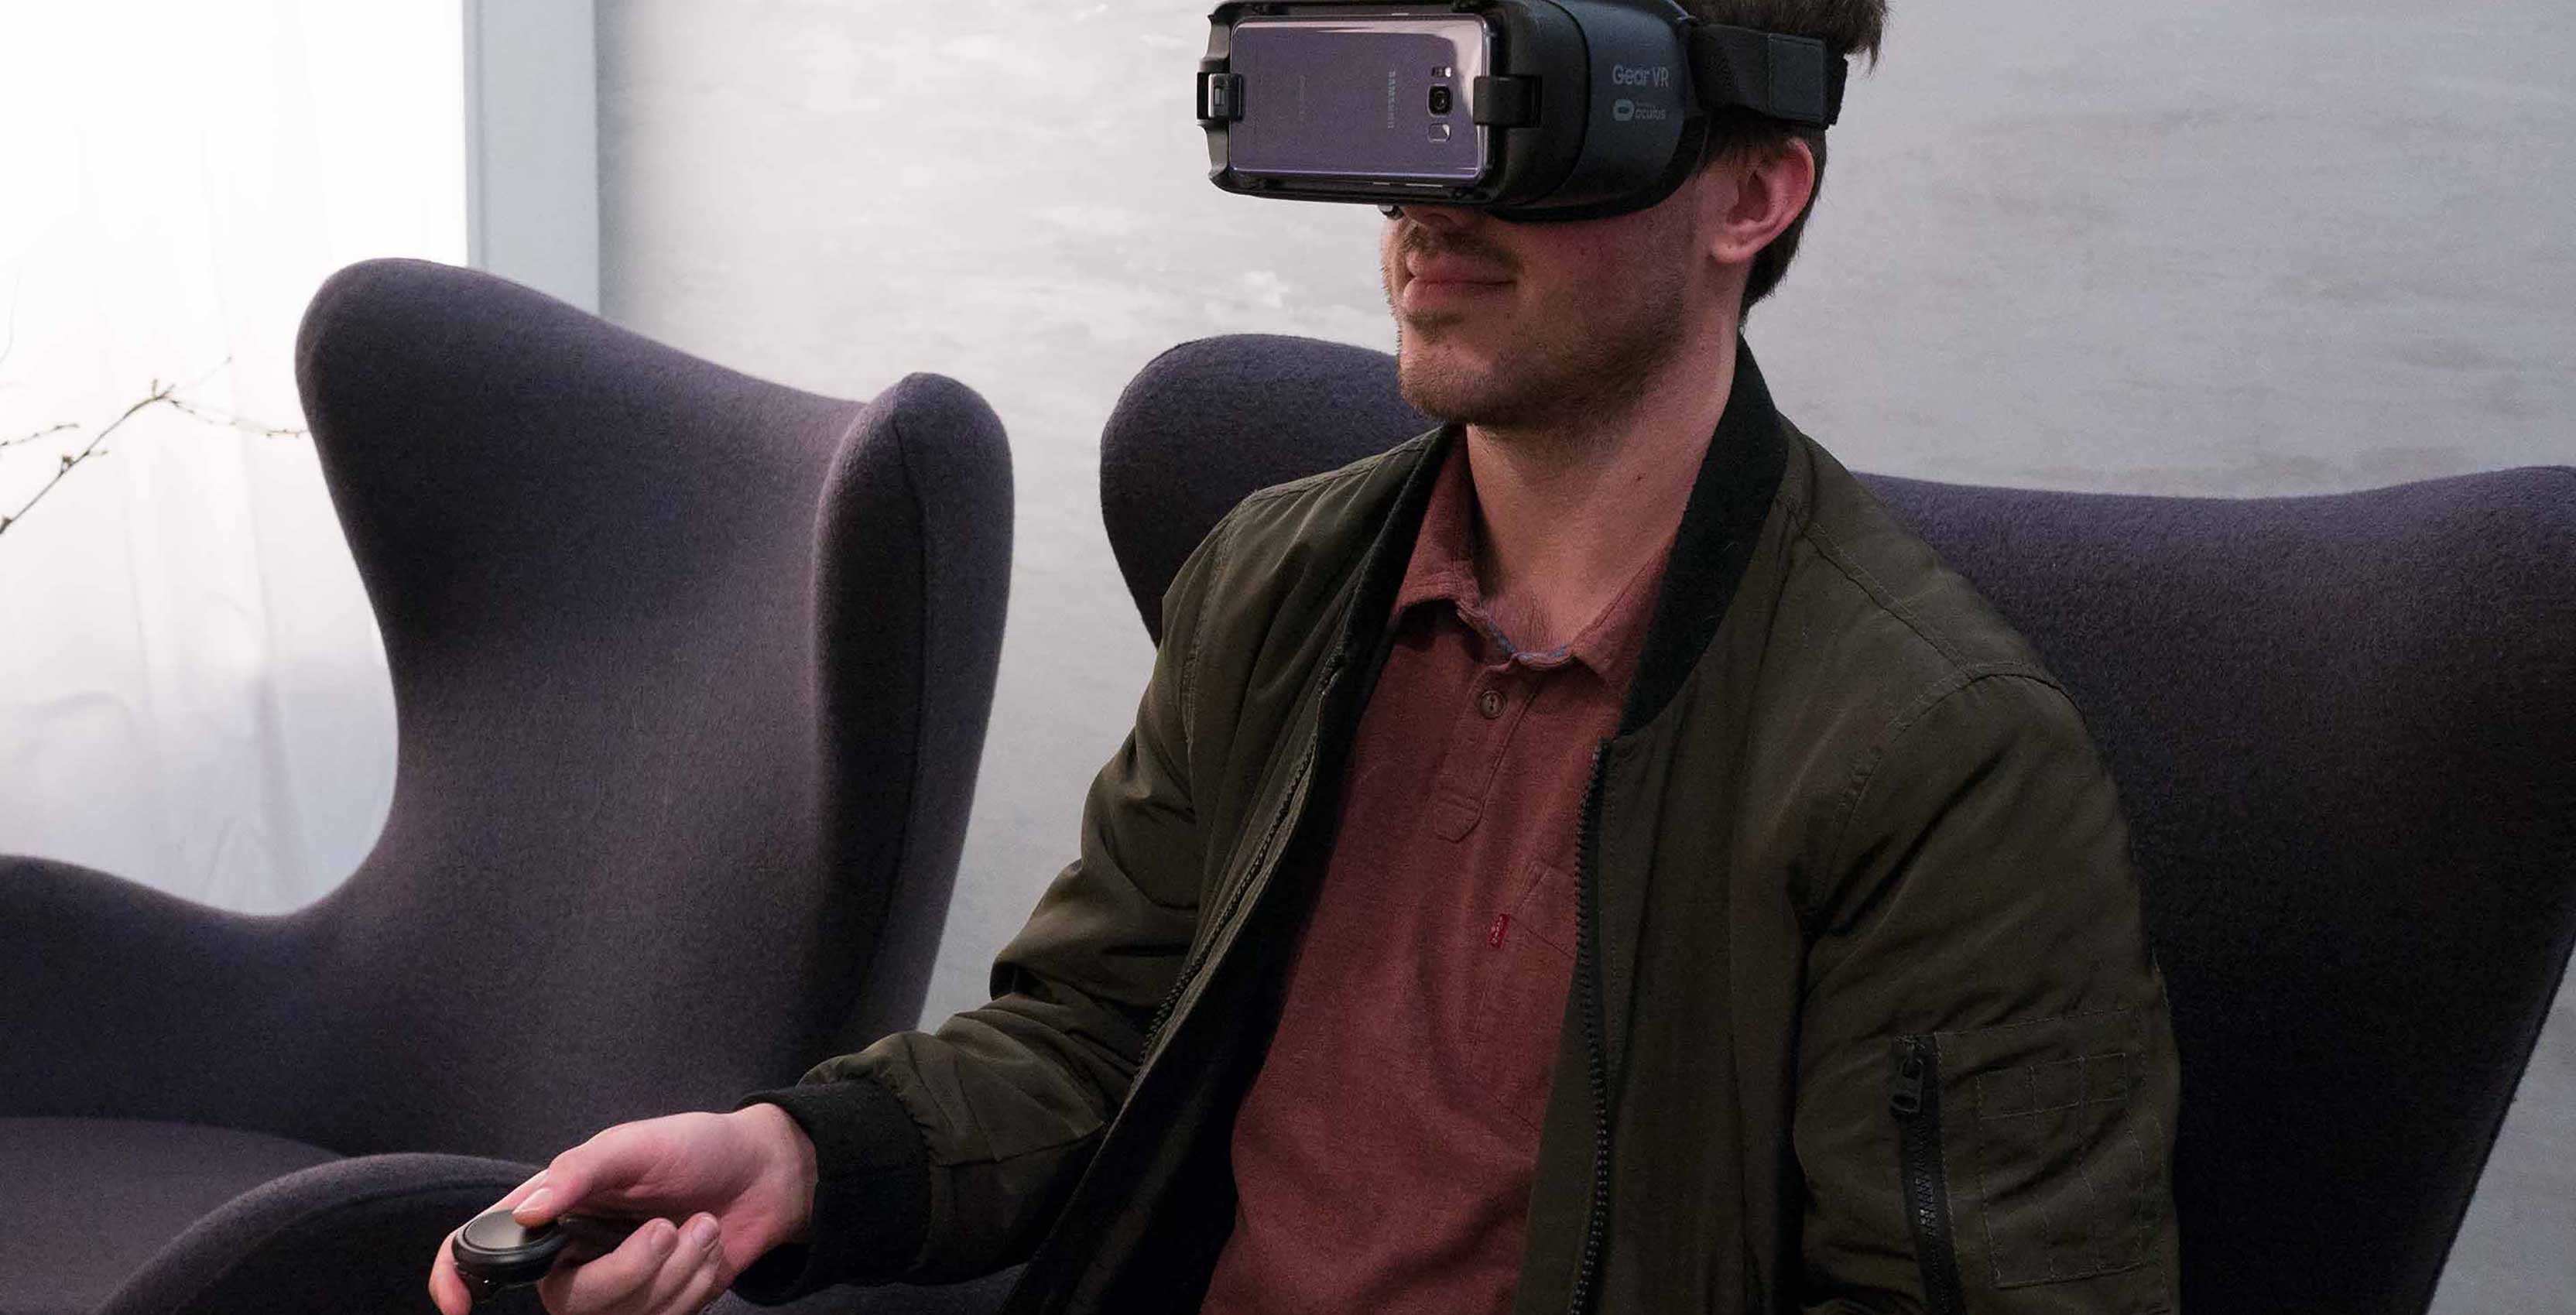 Man with VR headset watching content